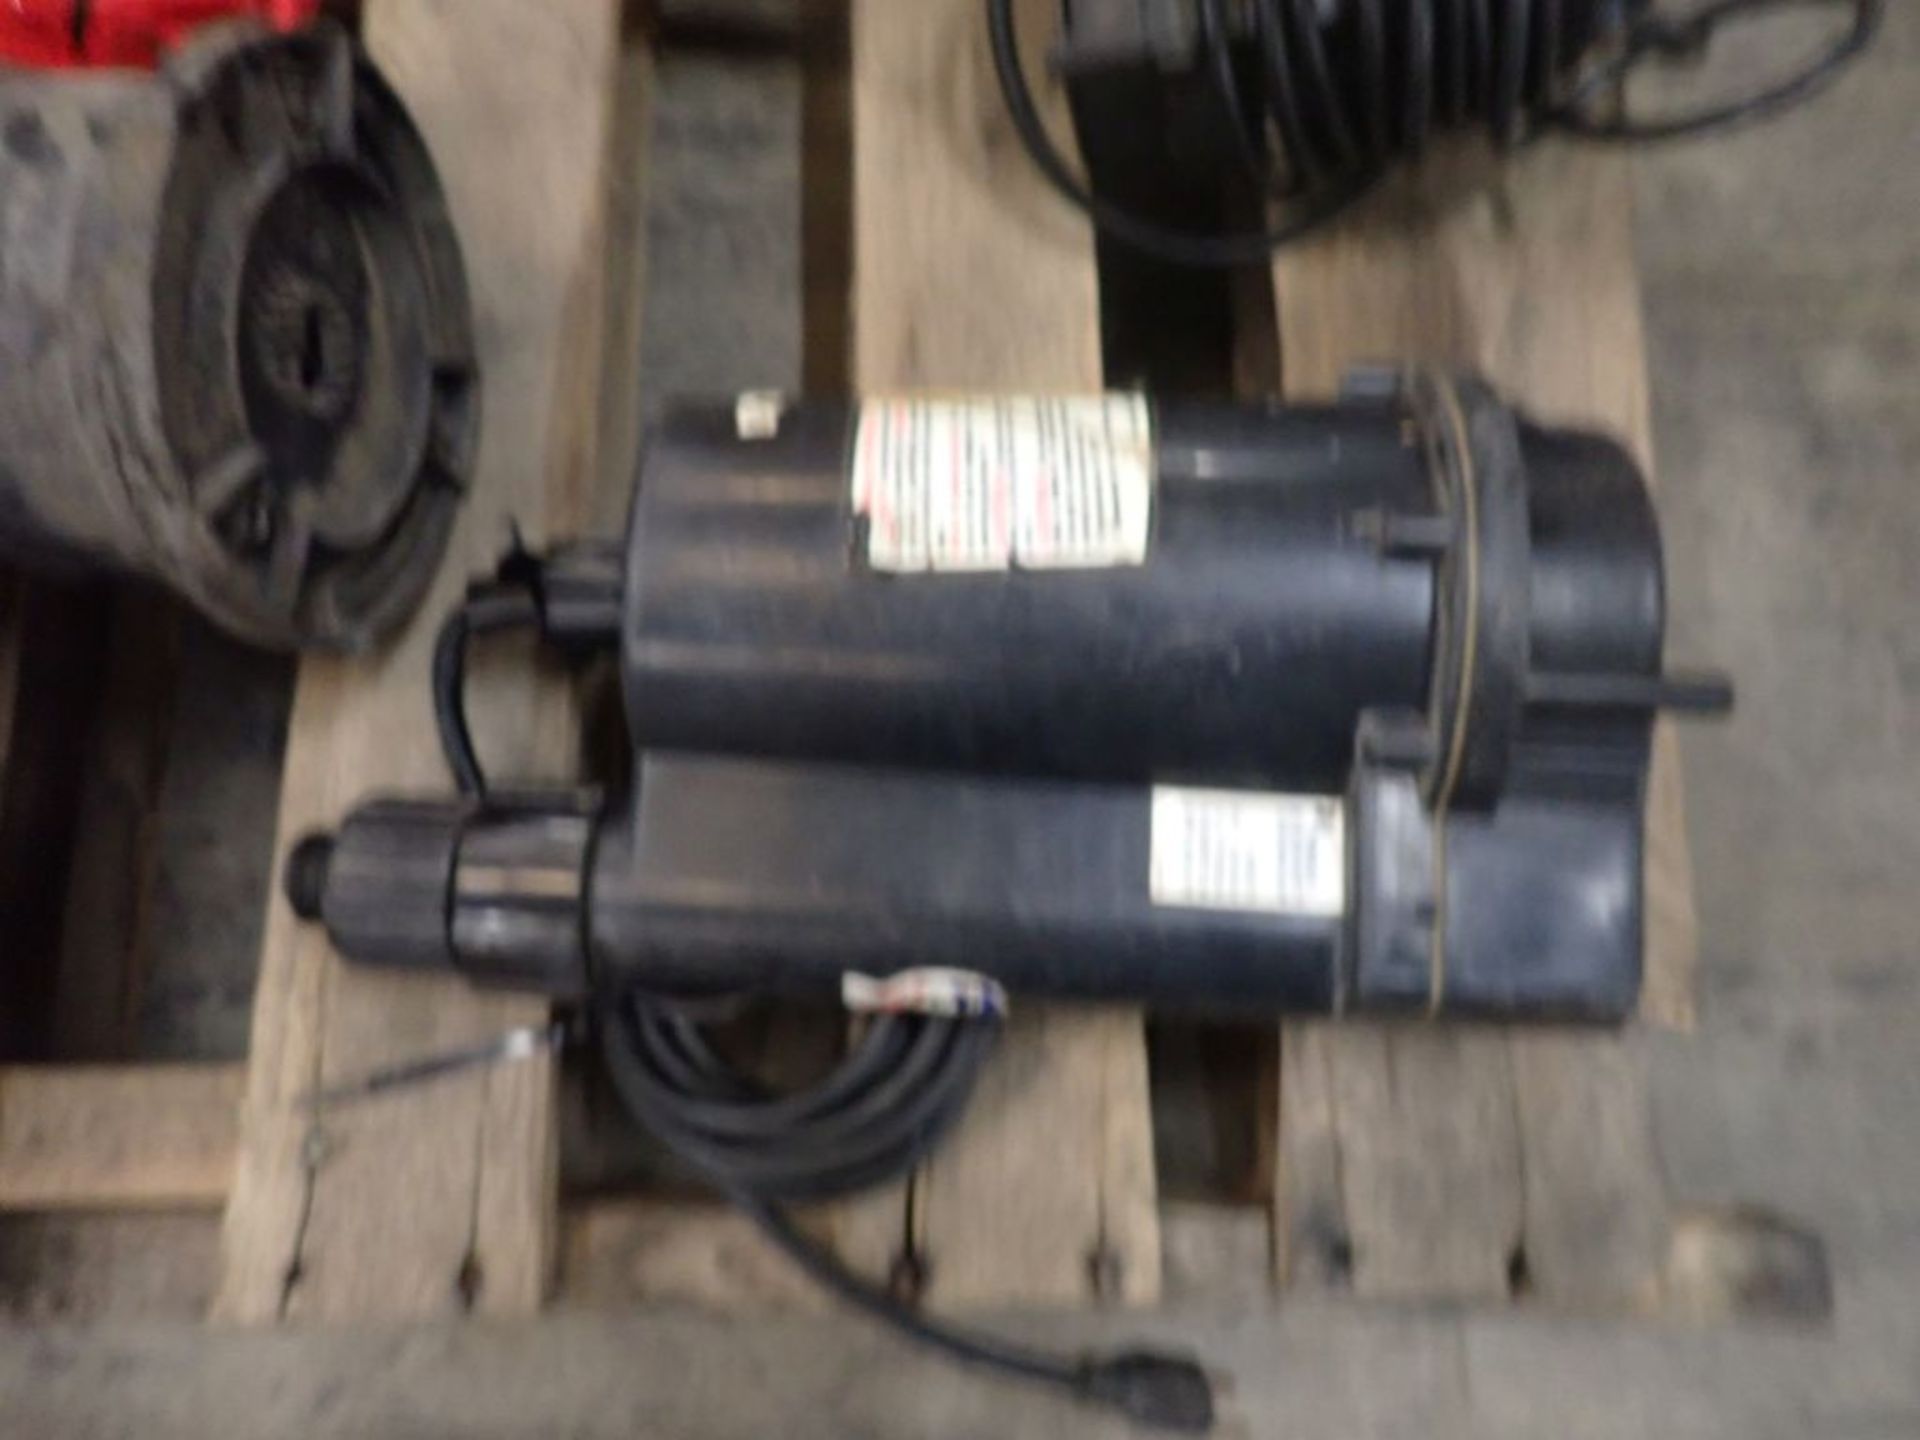 Lot of Assorted Submersible Pumps - Brands Include: DRS; Northern Industrial; Simer; Tag: 215079 - Image 15 of 18